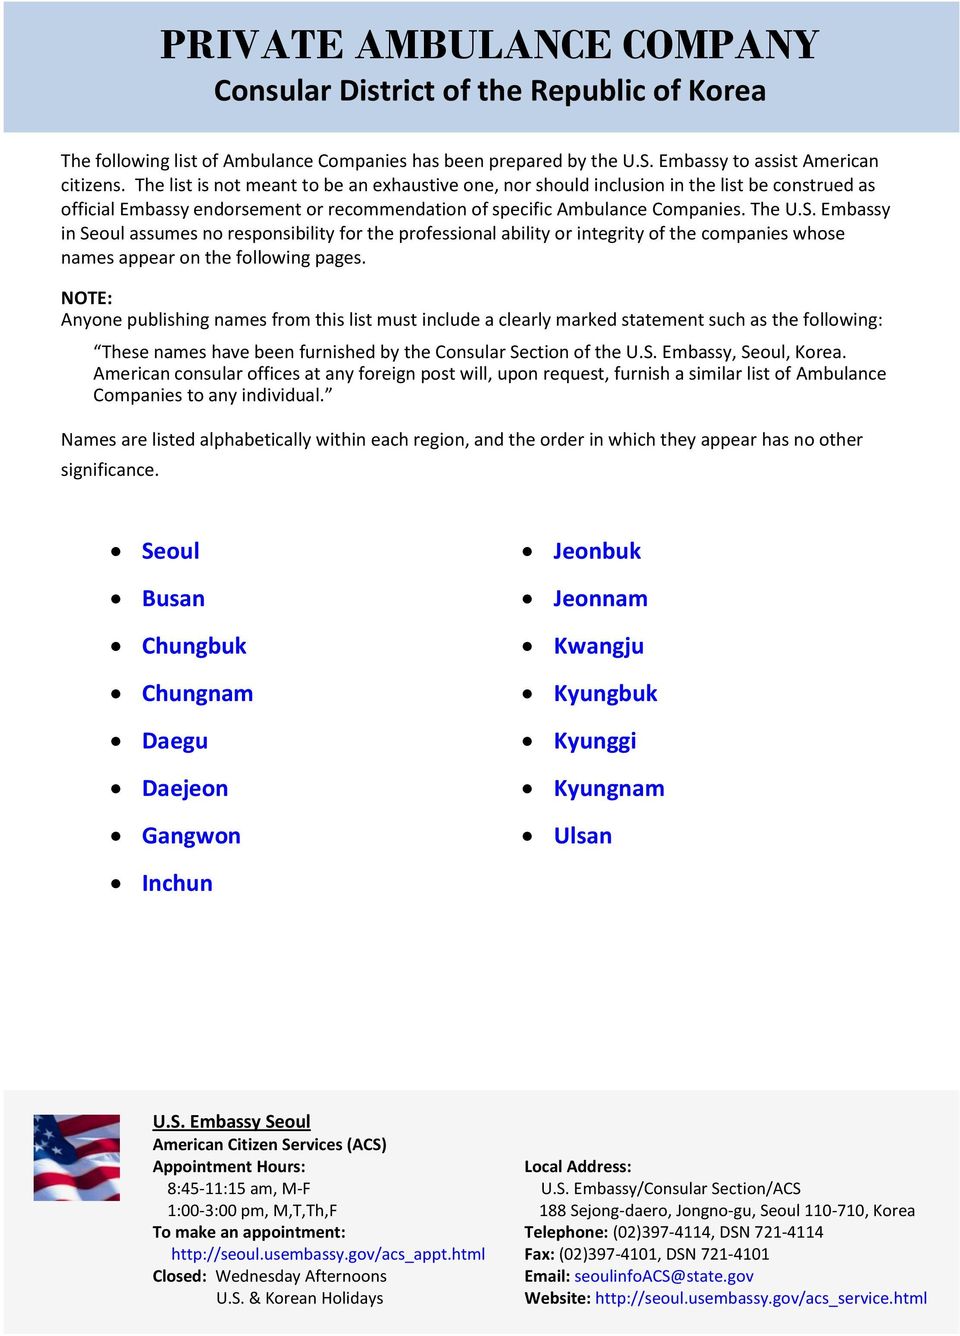 Embassy in Seoul assumes no responsibility for the professional ability or integrity of the companies whose names appear on the following pages.